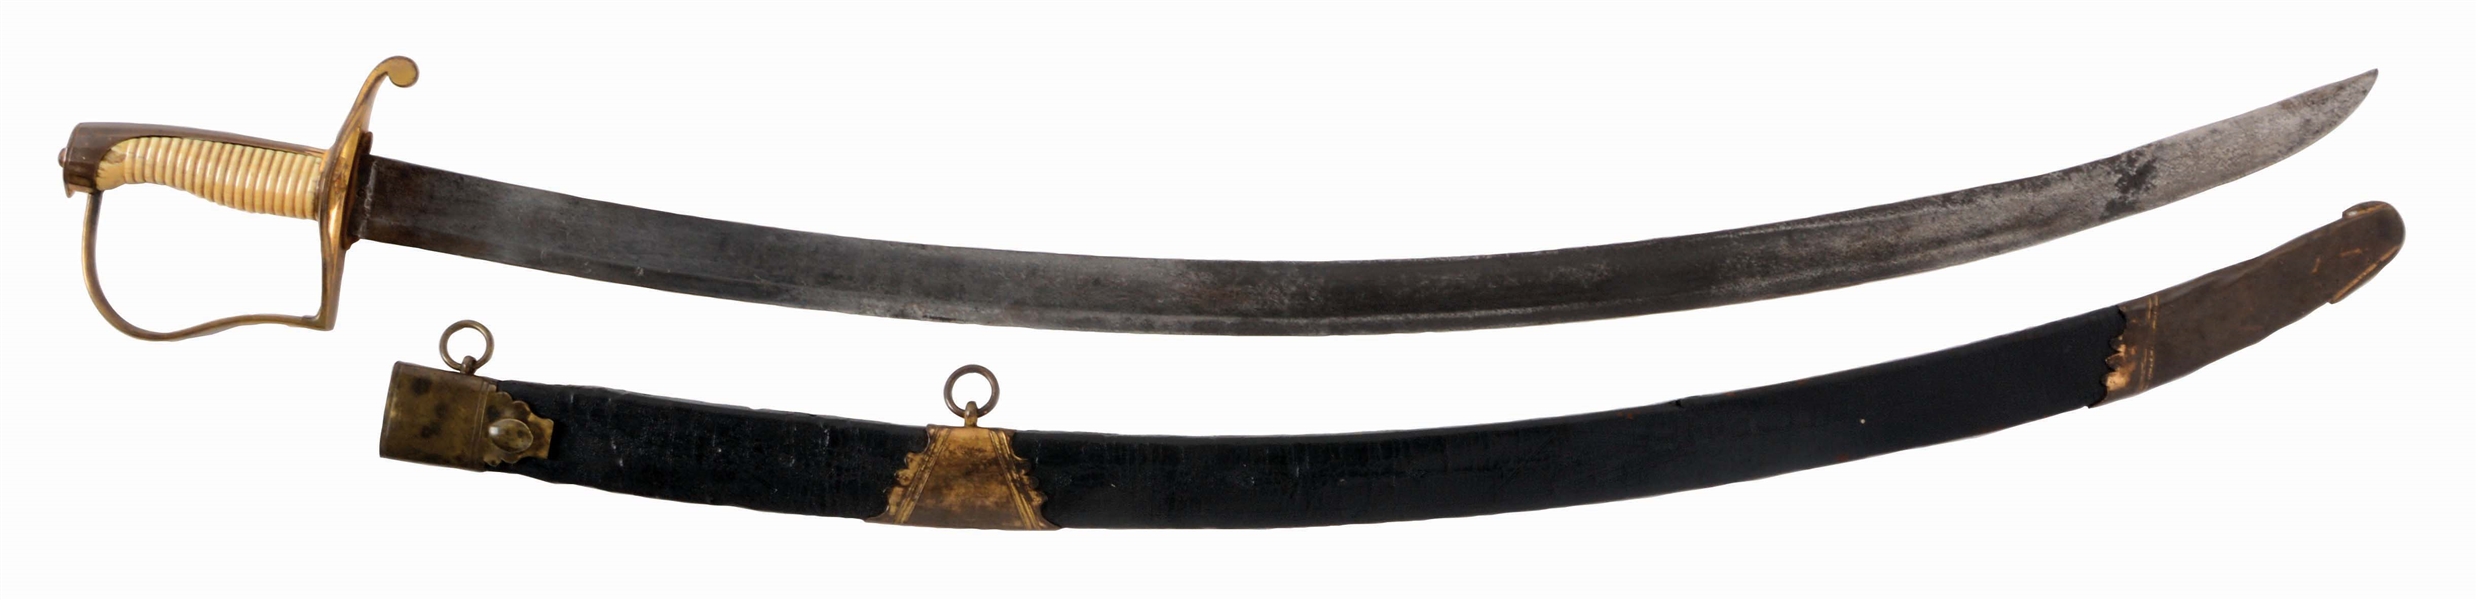 FINE RARE AND EARLY FEDERAL PERIOD CAVALRY OFFICERS SABER BY WELLS & CO., WITH SCABBARD.